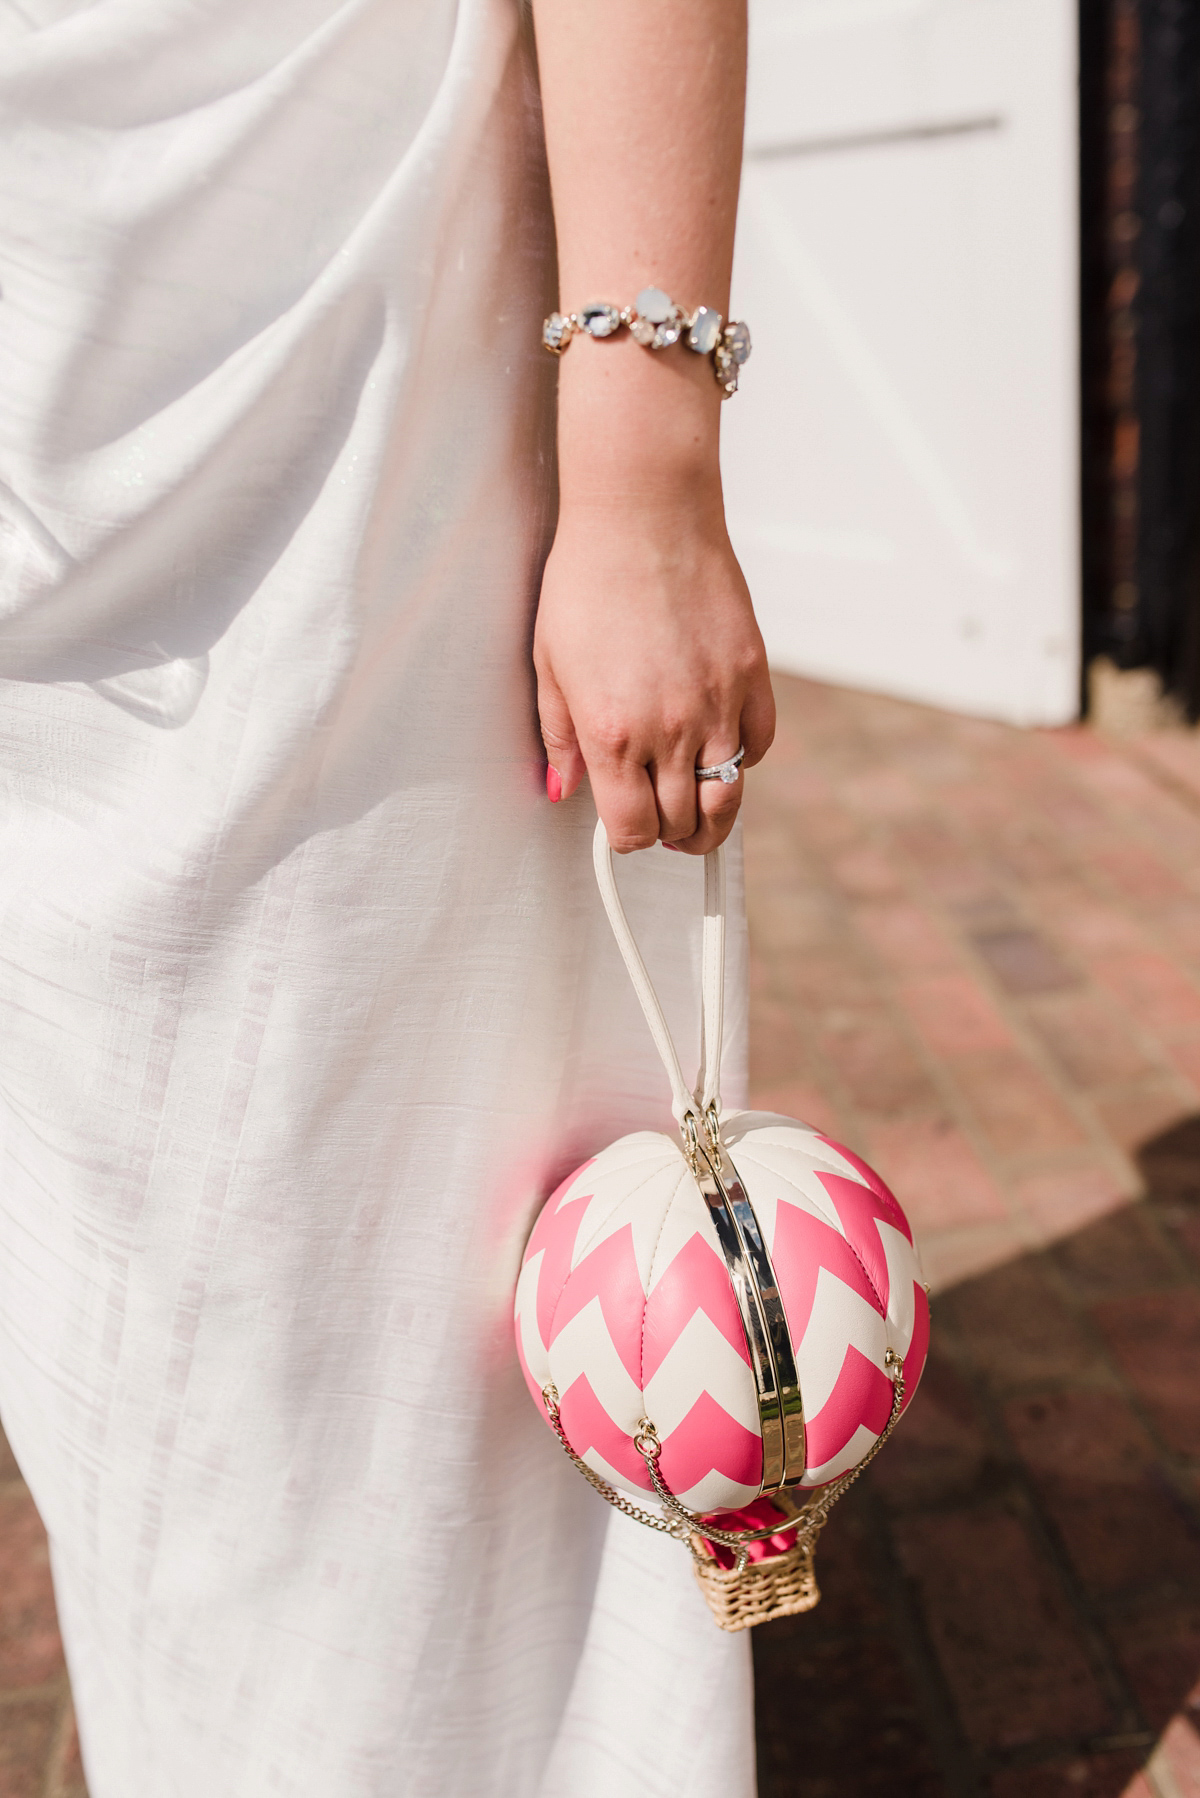 Liz wore a Vivienne Westwood dress for her hot air balloon and travel inspired wedding ('Around the World in 80 Days', Phileas Fogg style). A Lillibrooke Hall summer barn wedding, photographed by Faye Cornhill.